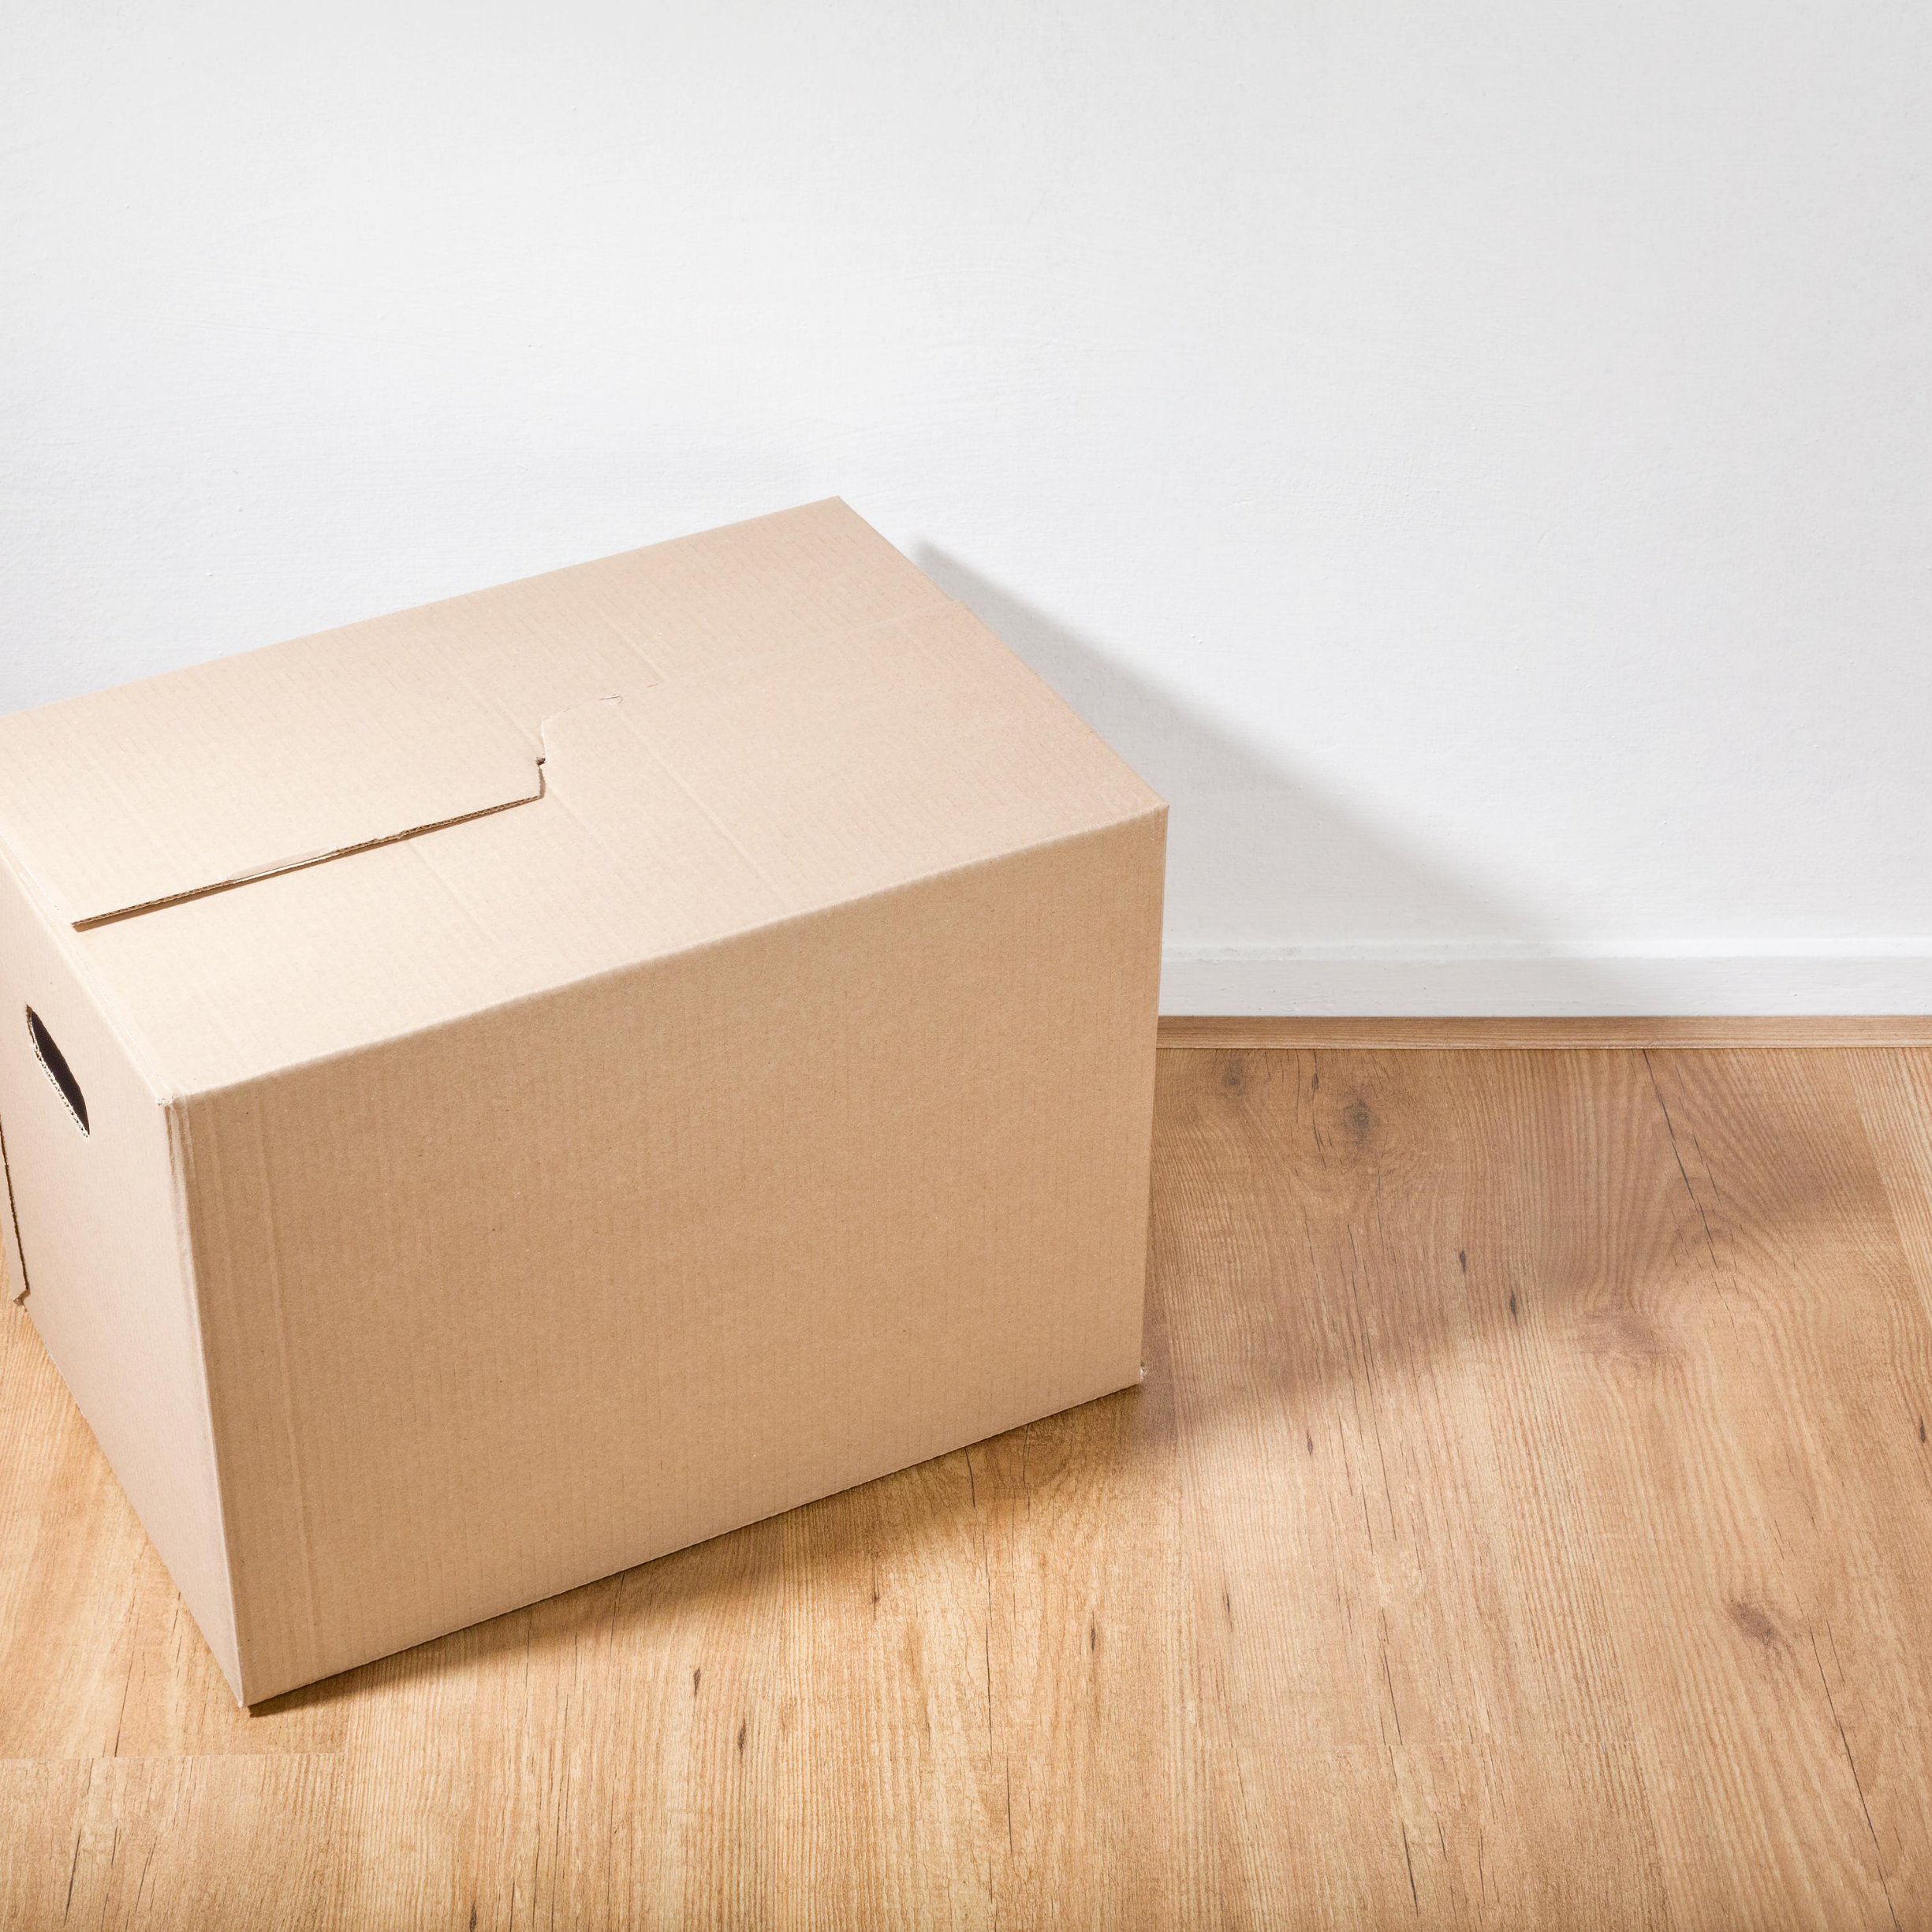 Moving box on wooden floor with white wall in background, represents “Match With a Roommate” program